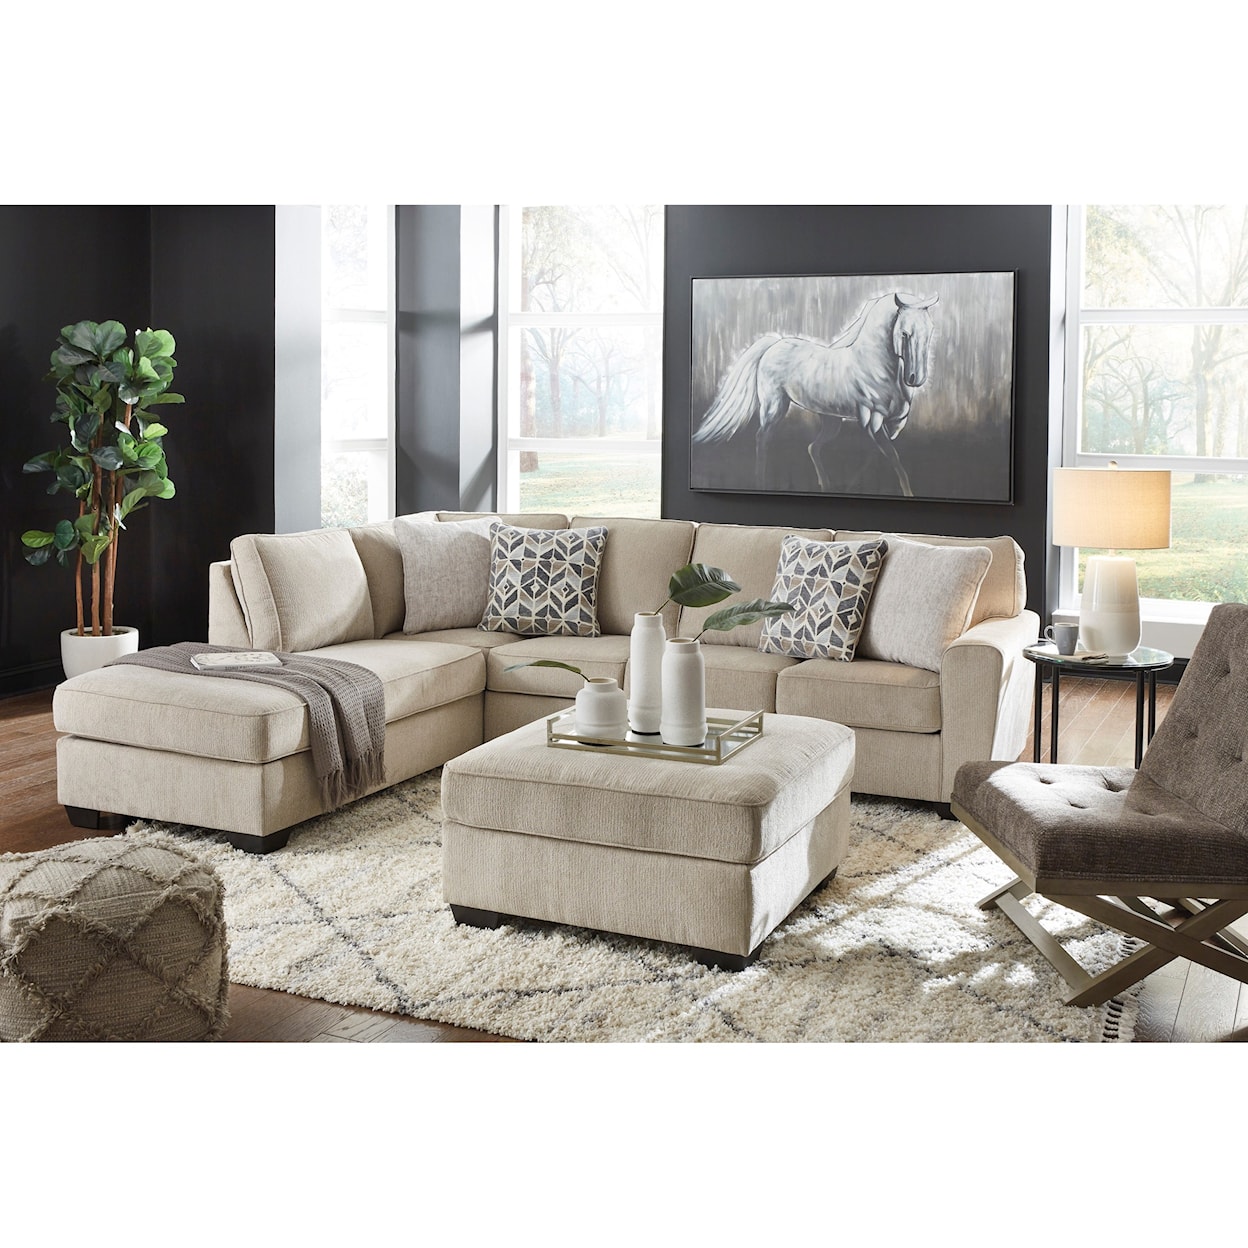 Signature Design Decelle 2-Piece Sectional with Chaise